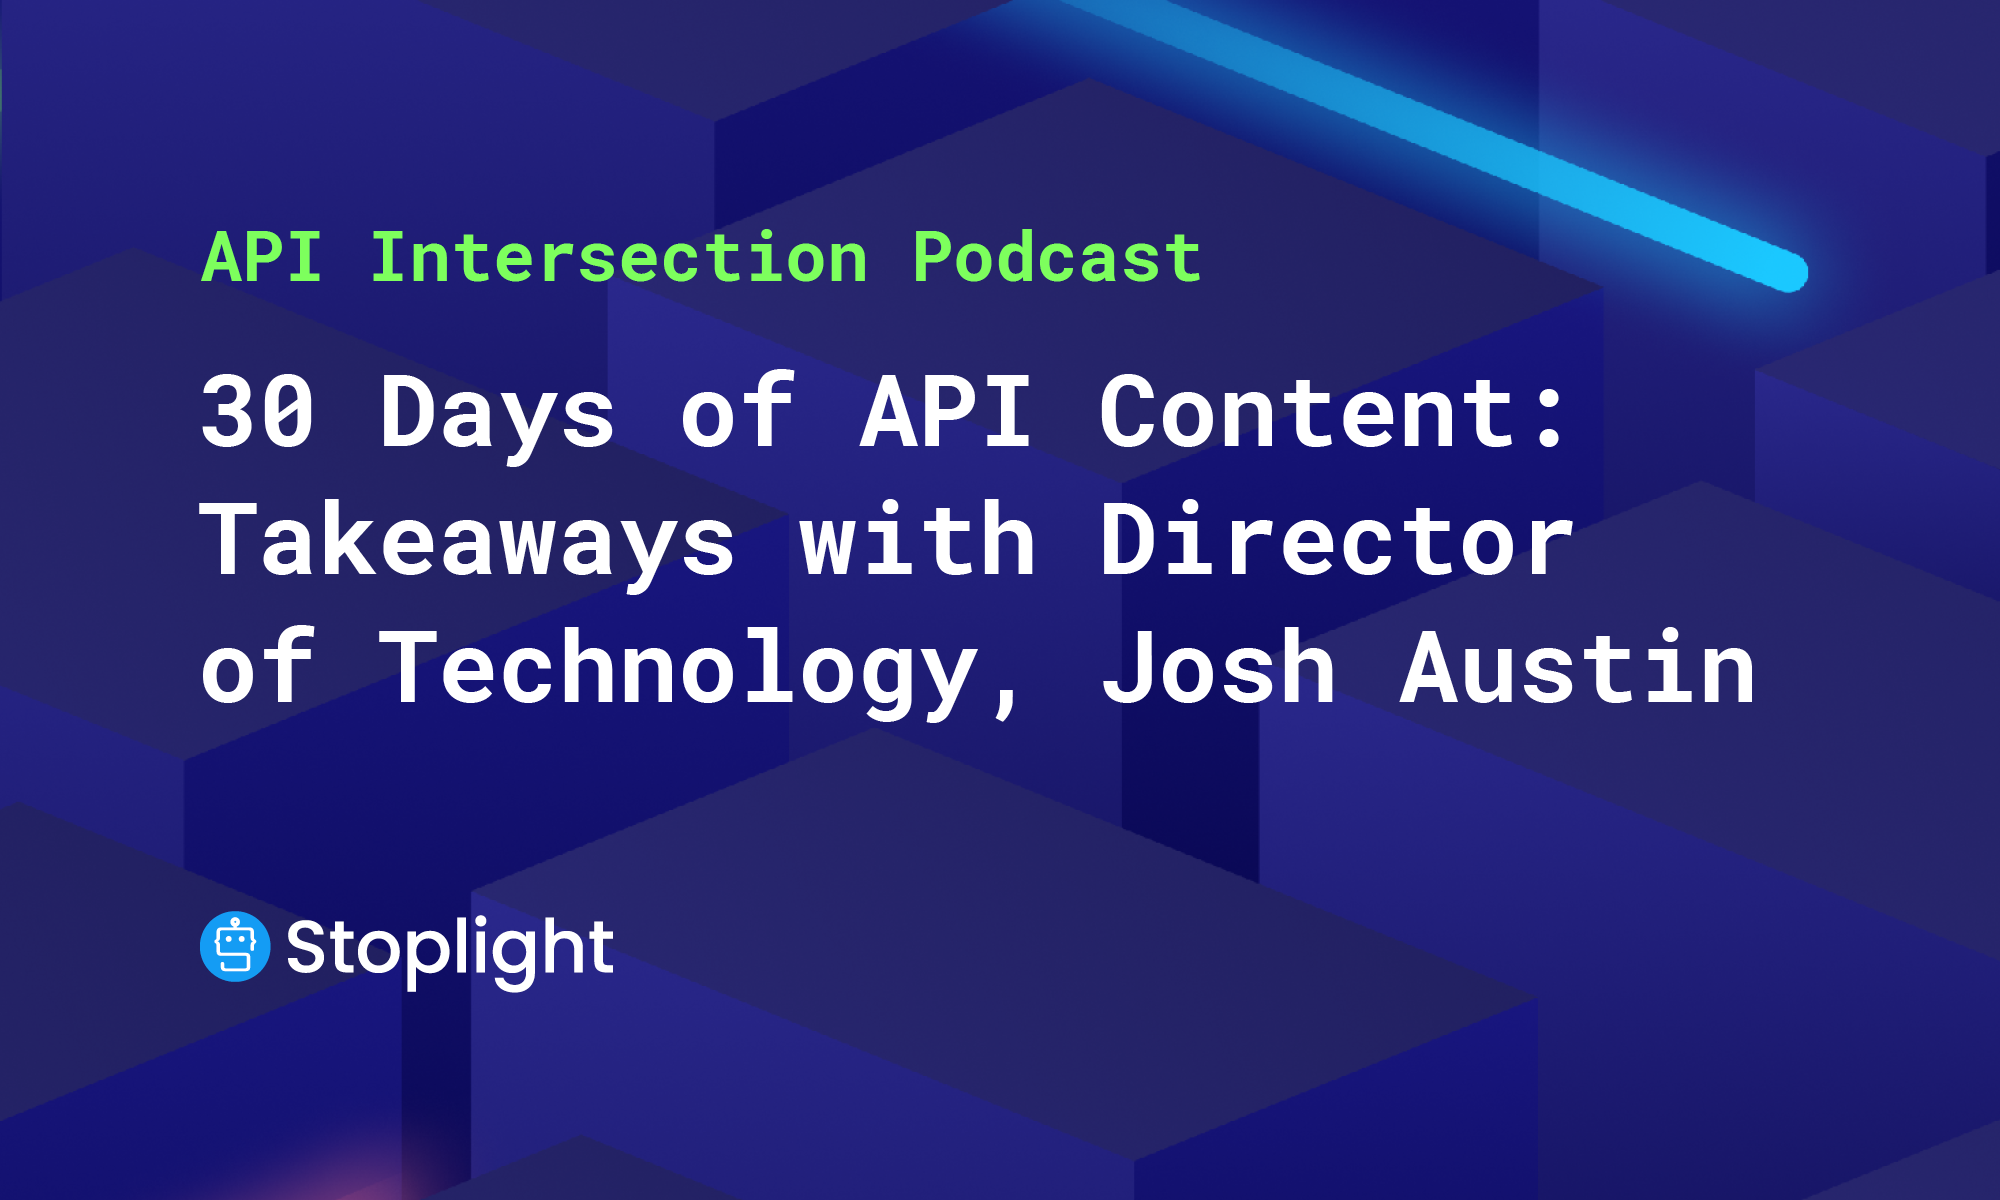 30 Days of API Content: Takeaways with Director of Technology, Josh Austin